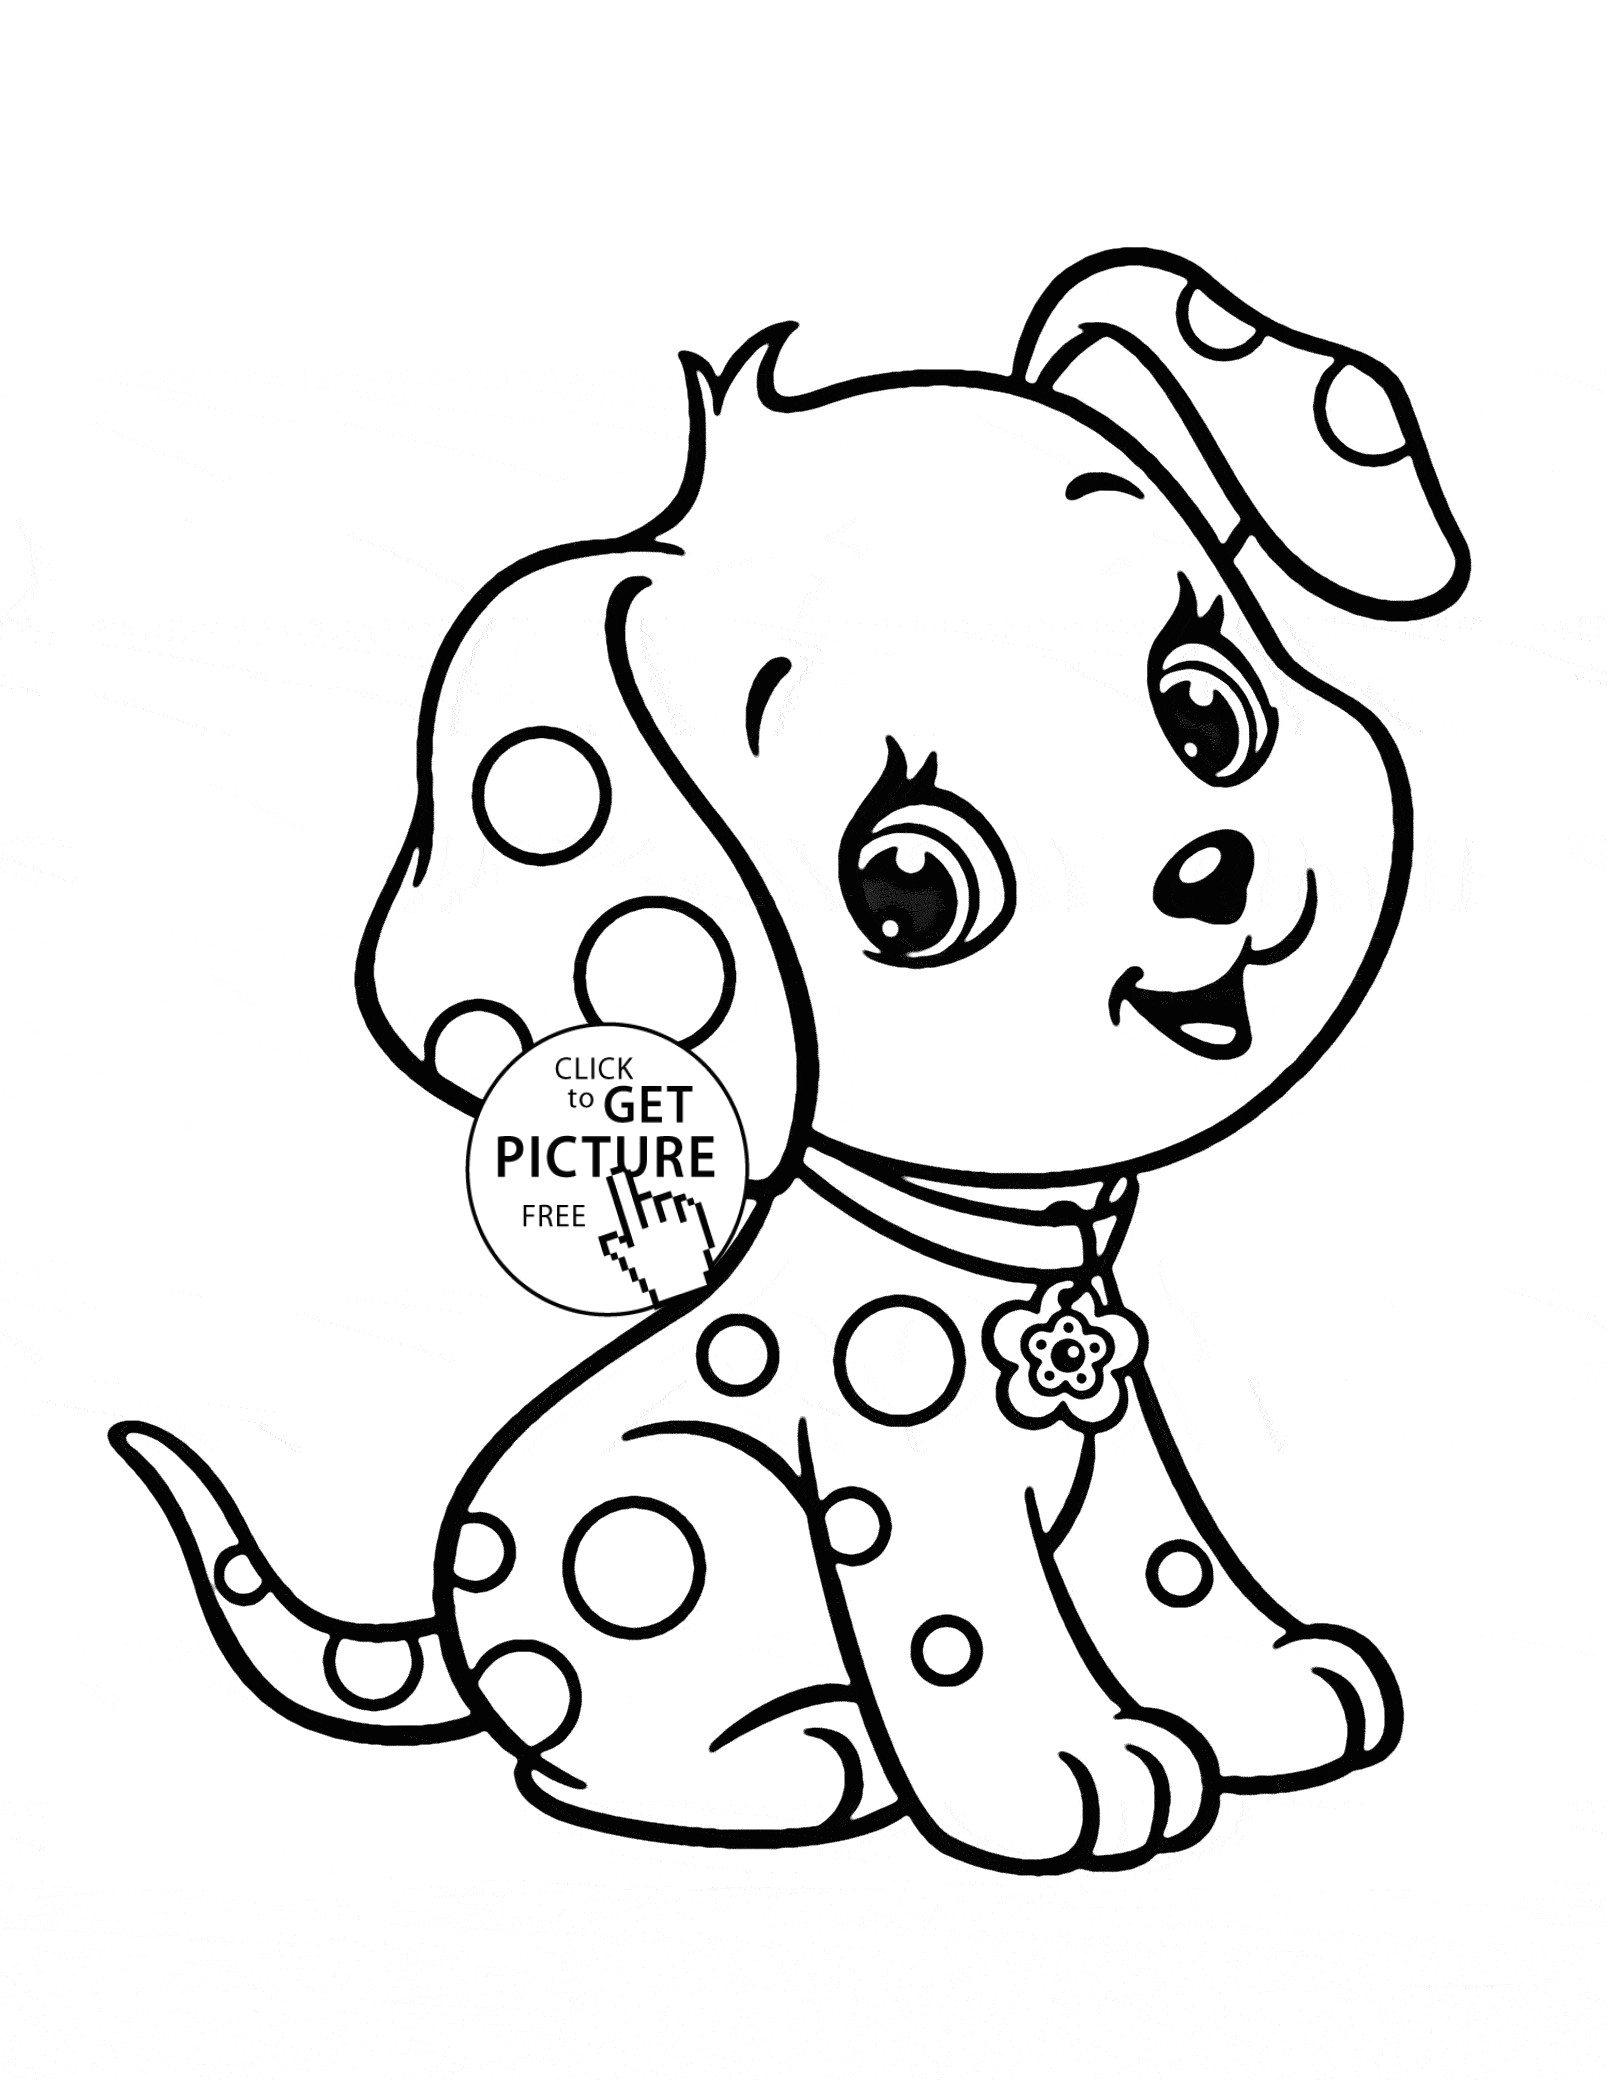 Drawing Disney Dogs Excellent Article with Great Ideas About Dogs Dogs Tips